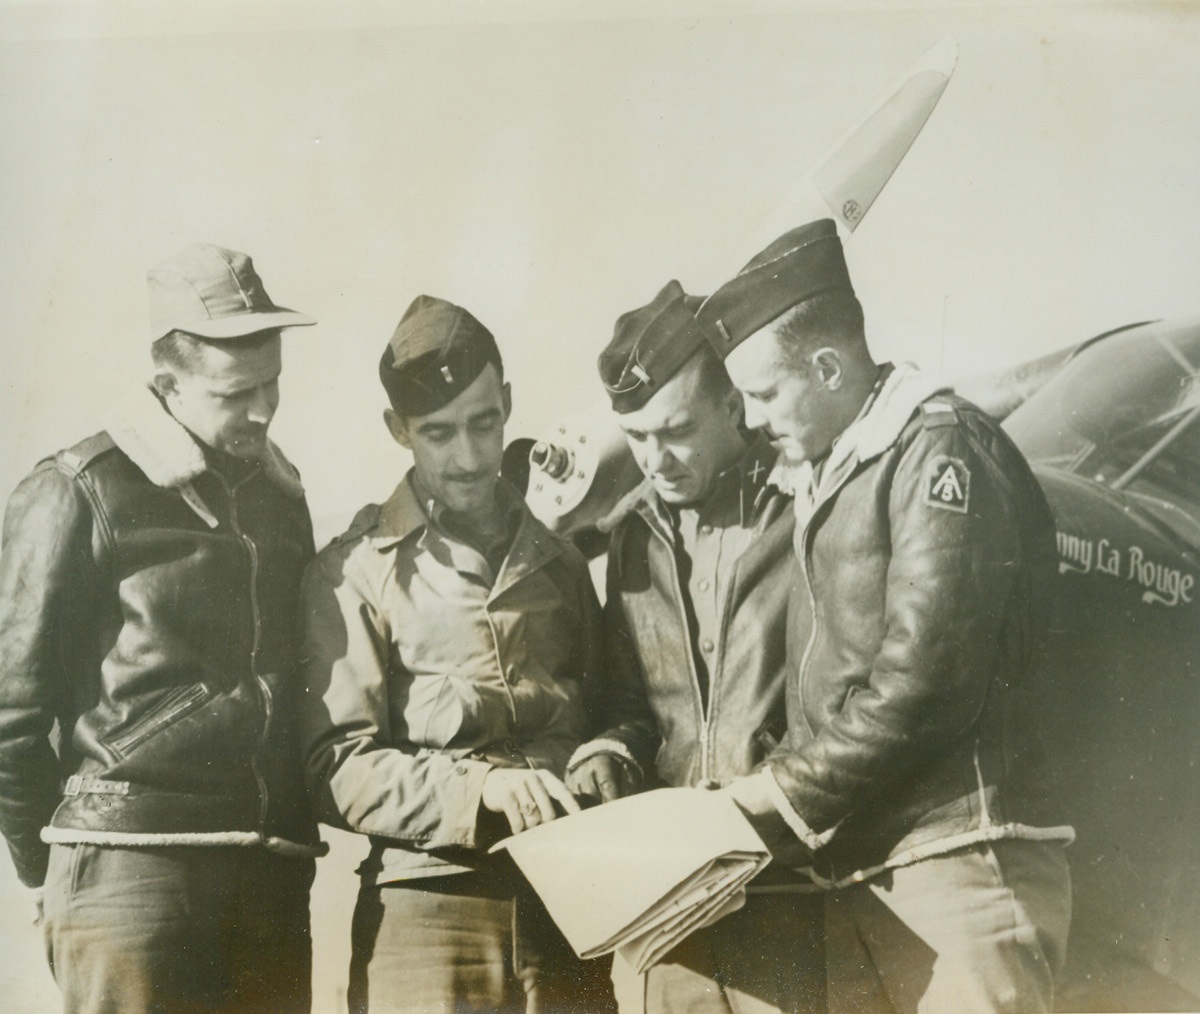 Ready for the Next Leap, 2/7/1944. Italy – Yank pilots flying Cubs in Italy trace their next mission. (left to right) 2nd Lt. W. Holden, Jr., of Baltimore, Mad.; 2nd Lt. Dick Cummings, of Ames, Ia., D.F.C.; 2nd Lt. Oved S. Essary, Dallas, Texas, and 1st Lt. Richard W. Blake, of La Salle, Colo. Credit: (ACME);